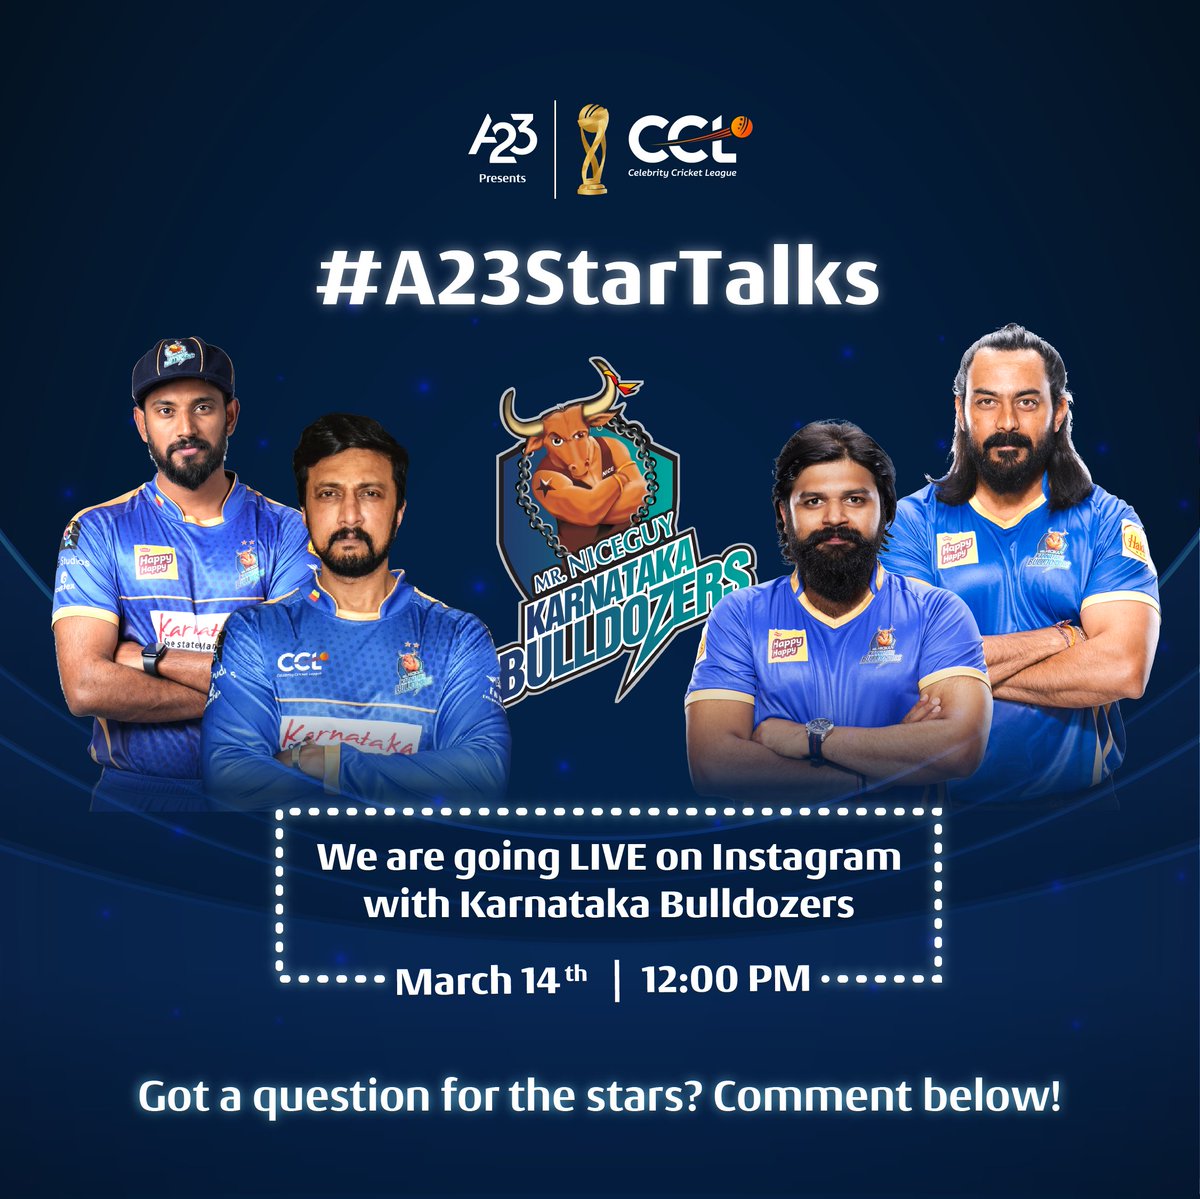 #Karnataka, it's your time to engage with the superstars! #A23StarTalks, in association with CCL and the Karnataka Bulldozers team, brings you a LIVE Q&A session. Drop your questions in the comments below and brace yourself for some exciting answers! Let's play together!